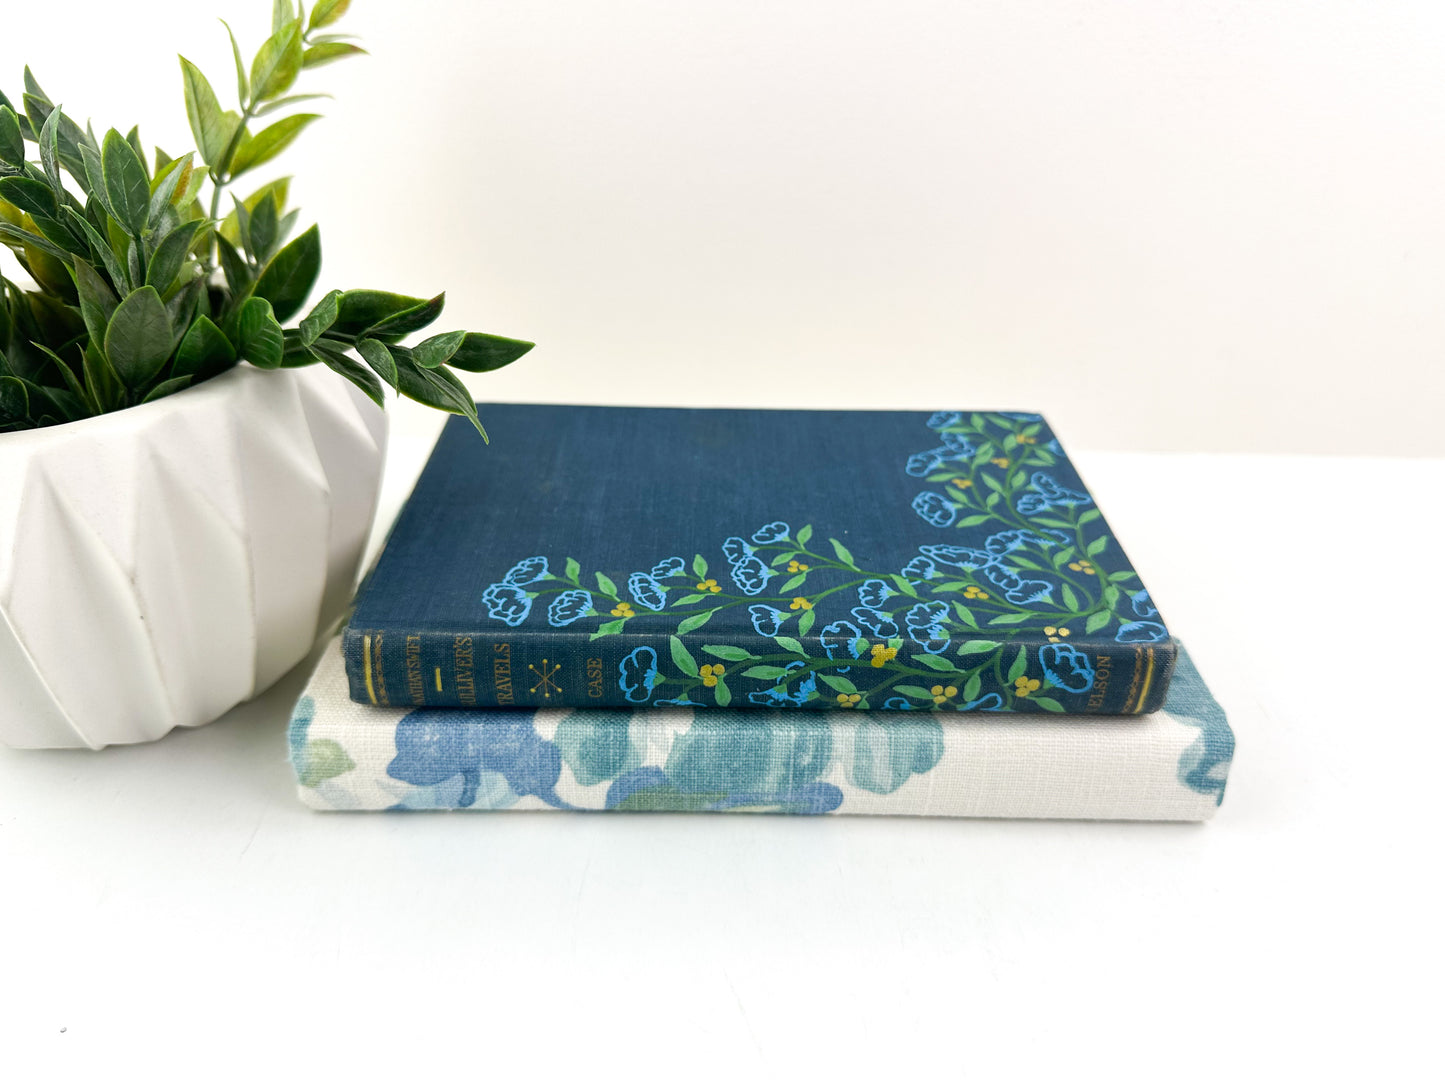 Designed by Artist- One of a Kind Book Set